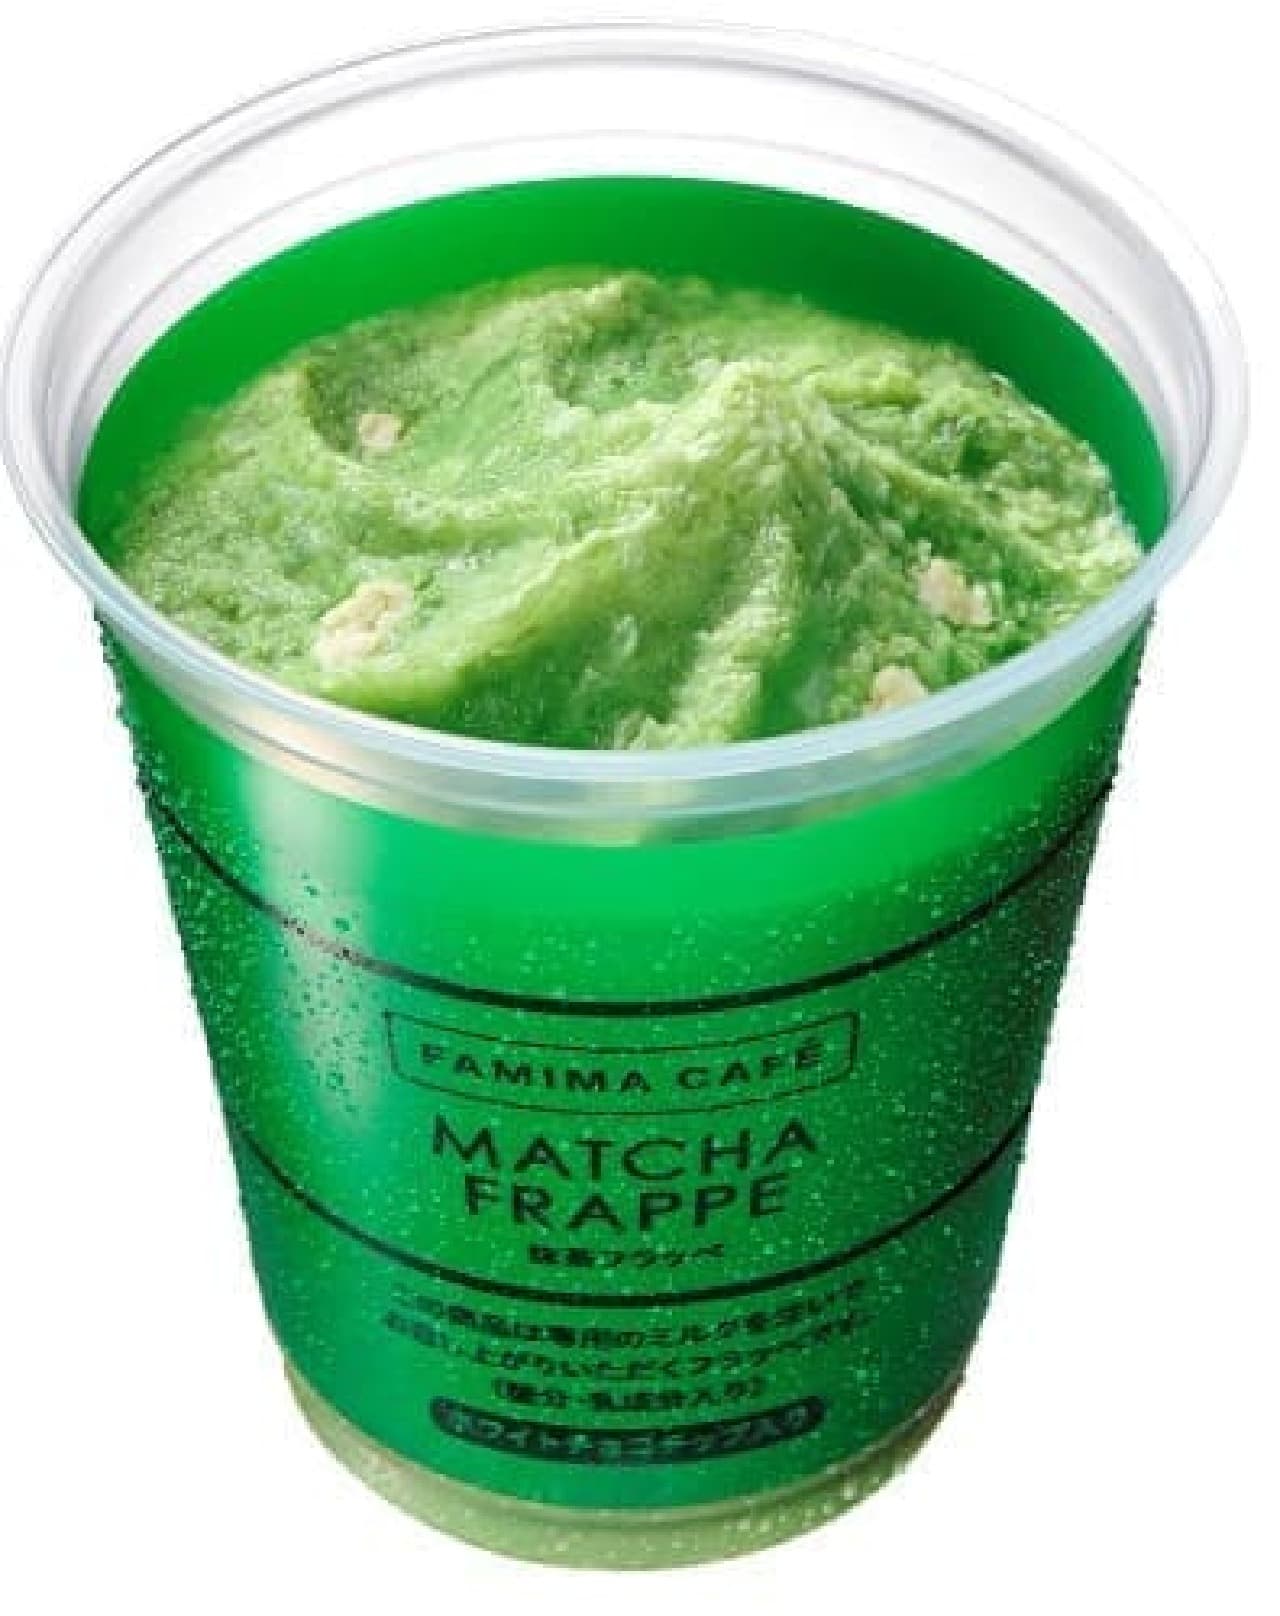 Matcha frappe (with white chocolate chips)